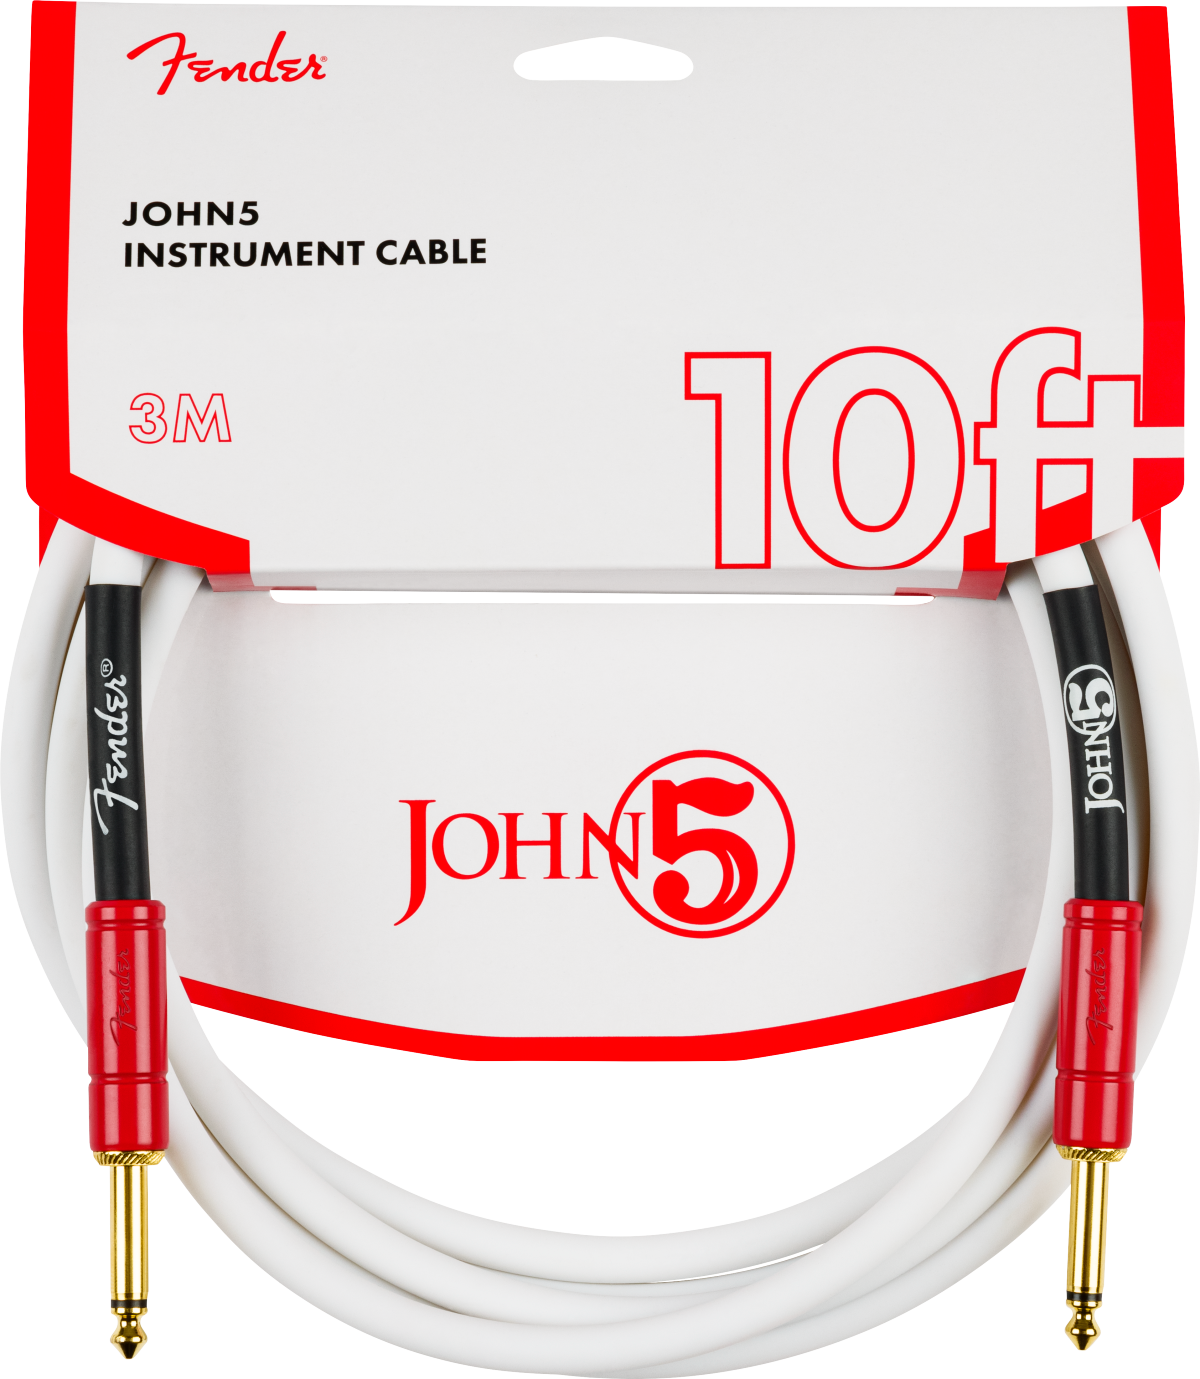 Fender John 5 Instrument Cable, White and Red, 10'